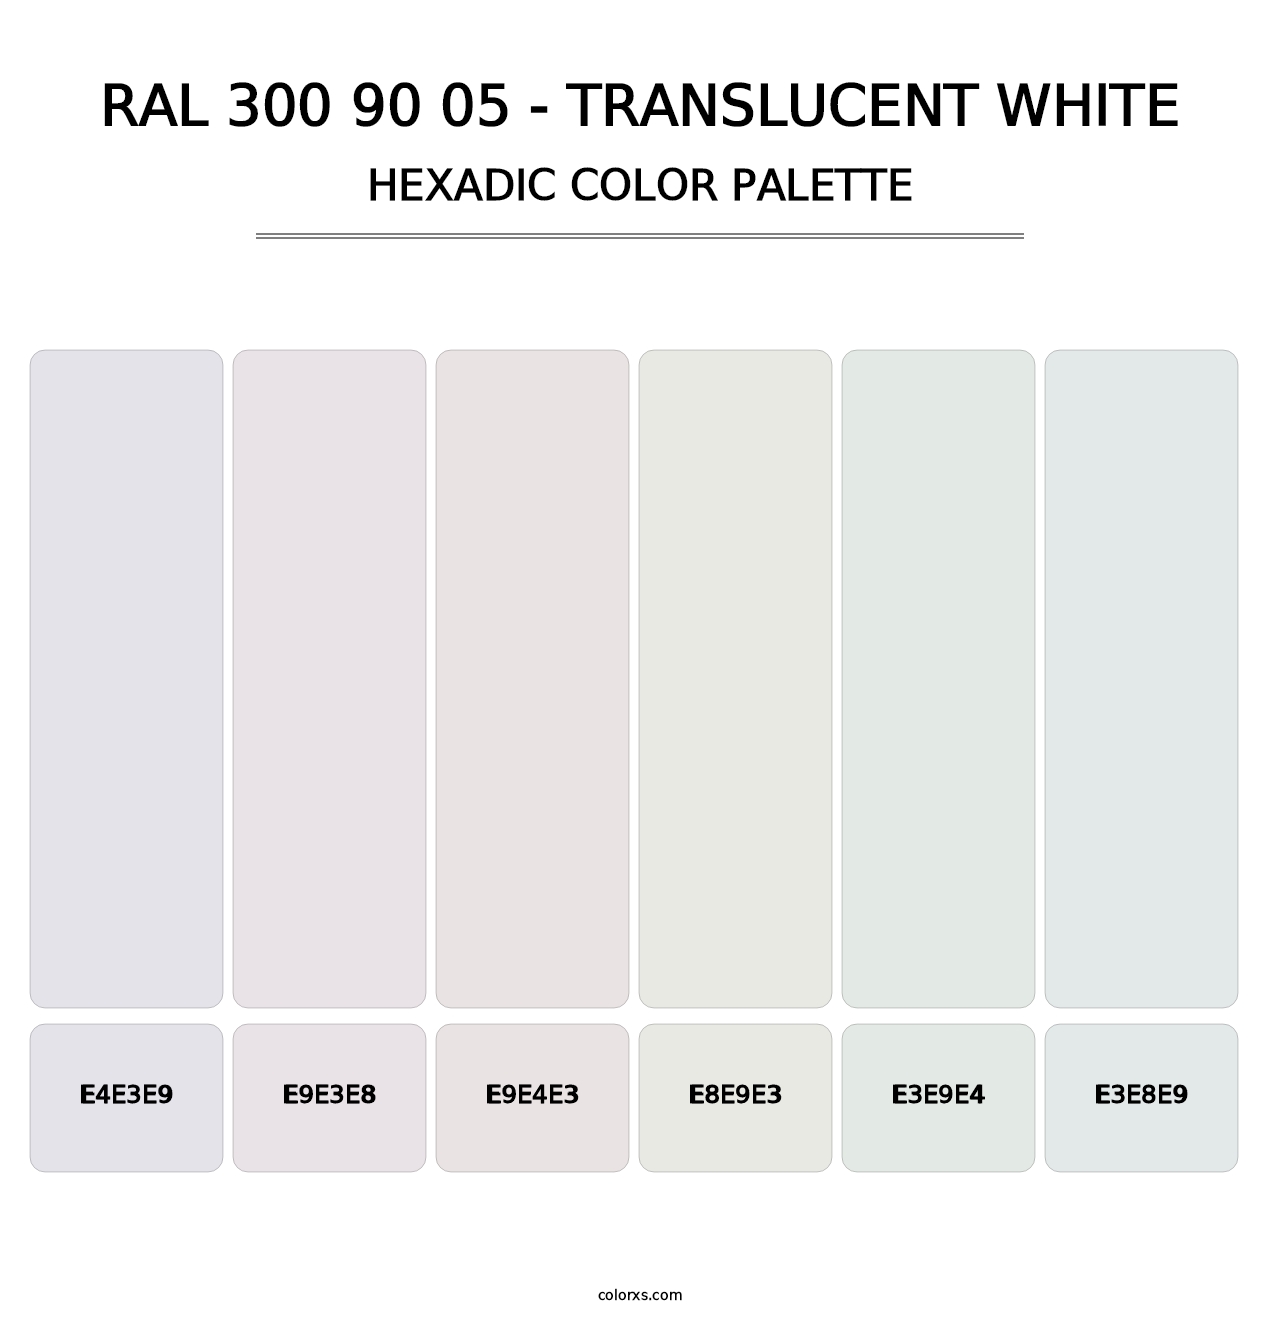 RAL 300 90 05 - Translucent White - Hexadic Color Palette